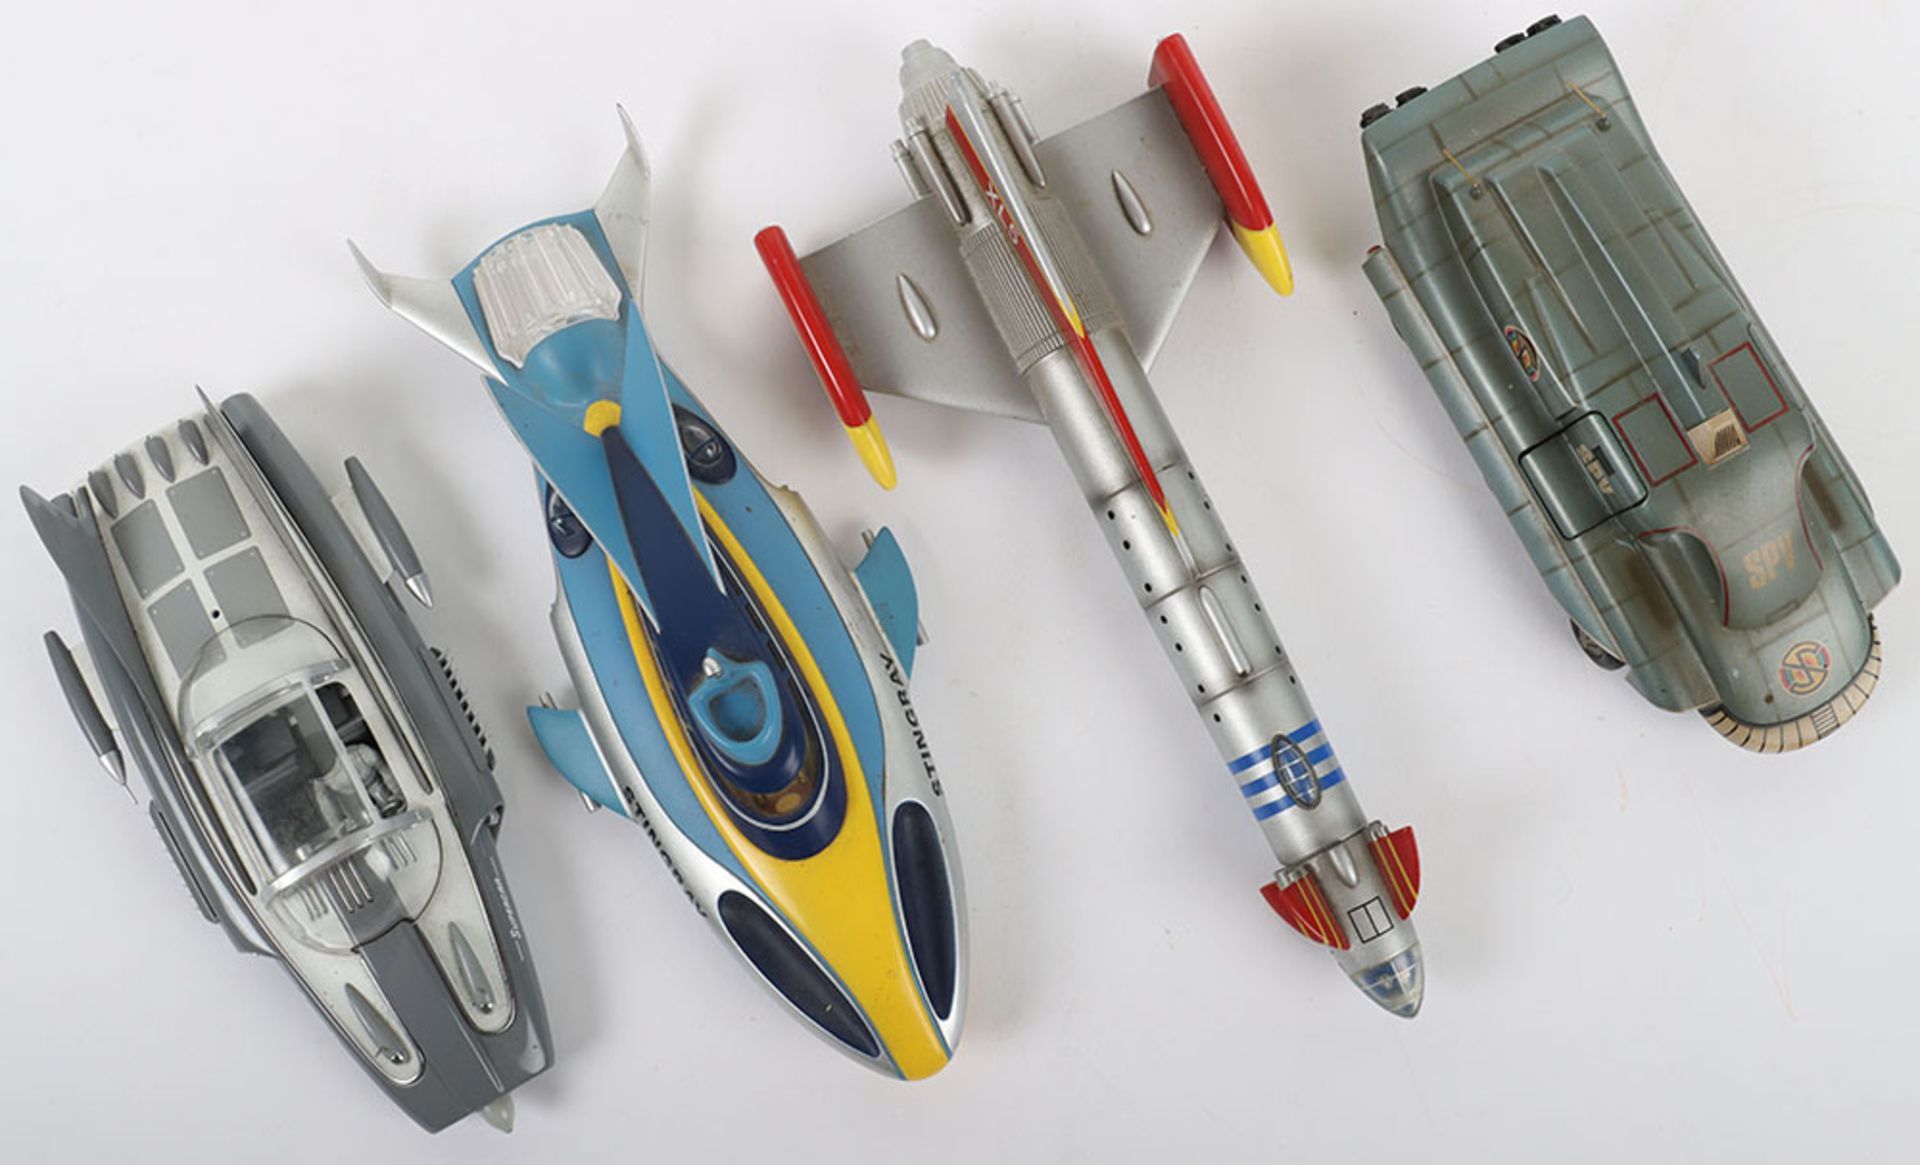 Unboxed Product Enterprise Gerry Anderson diecast models - Image 2 of 2